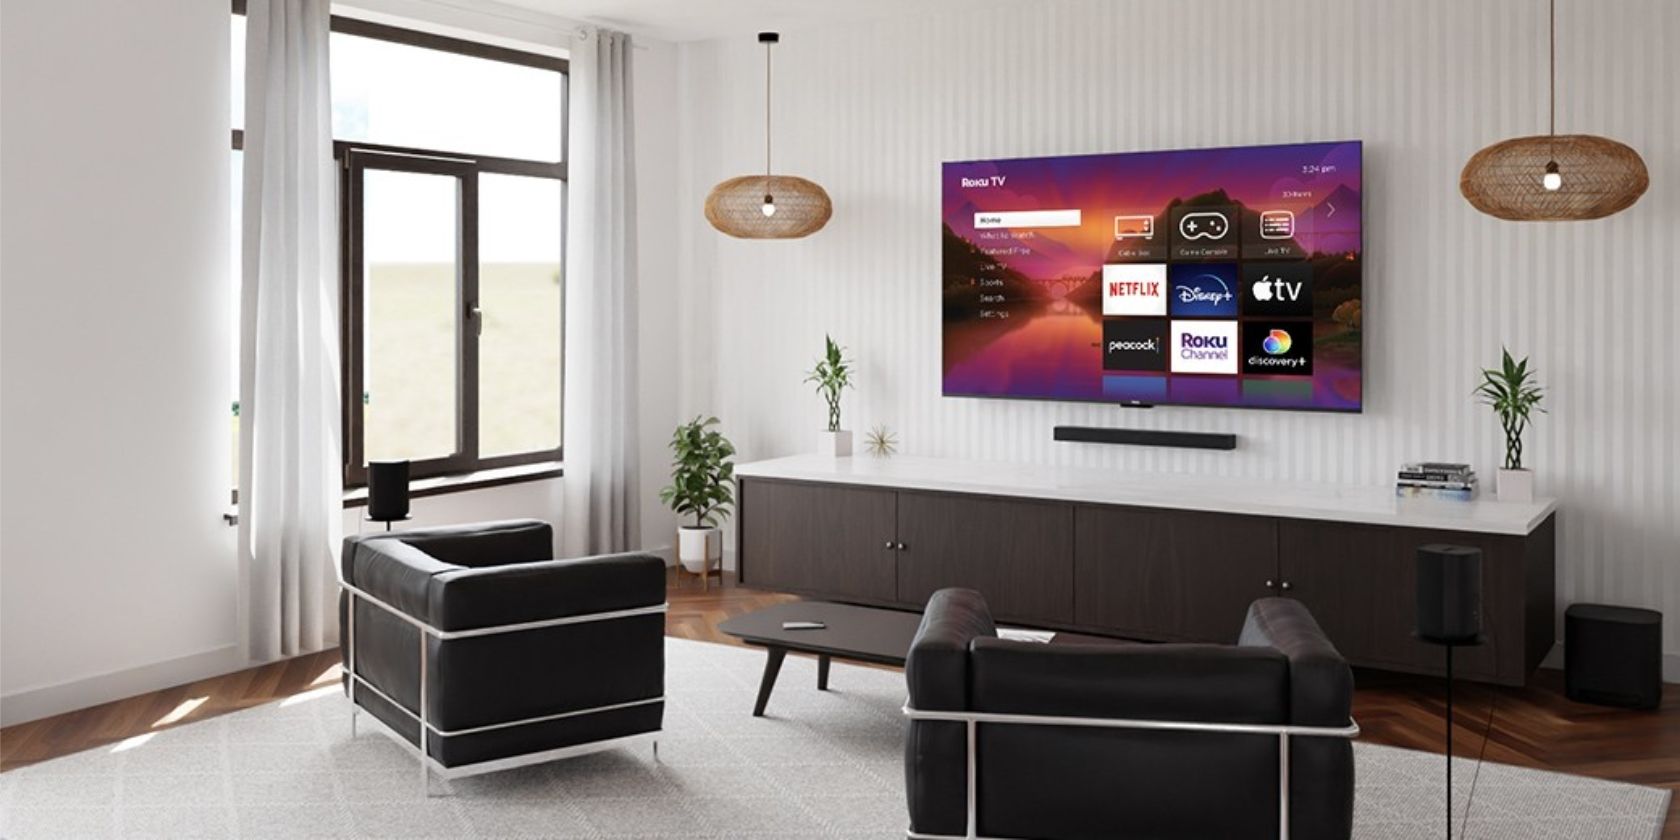 Roku Plus Series 4K Television Mounted on a Wall in a Living Room Setting